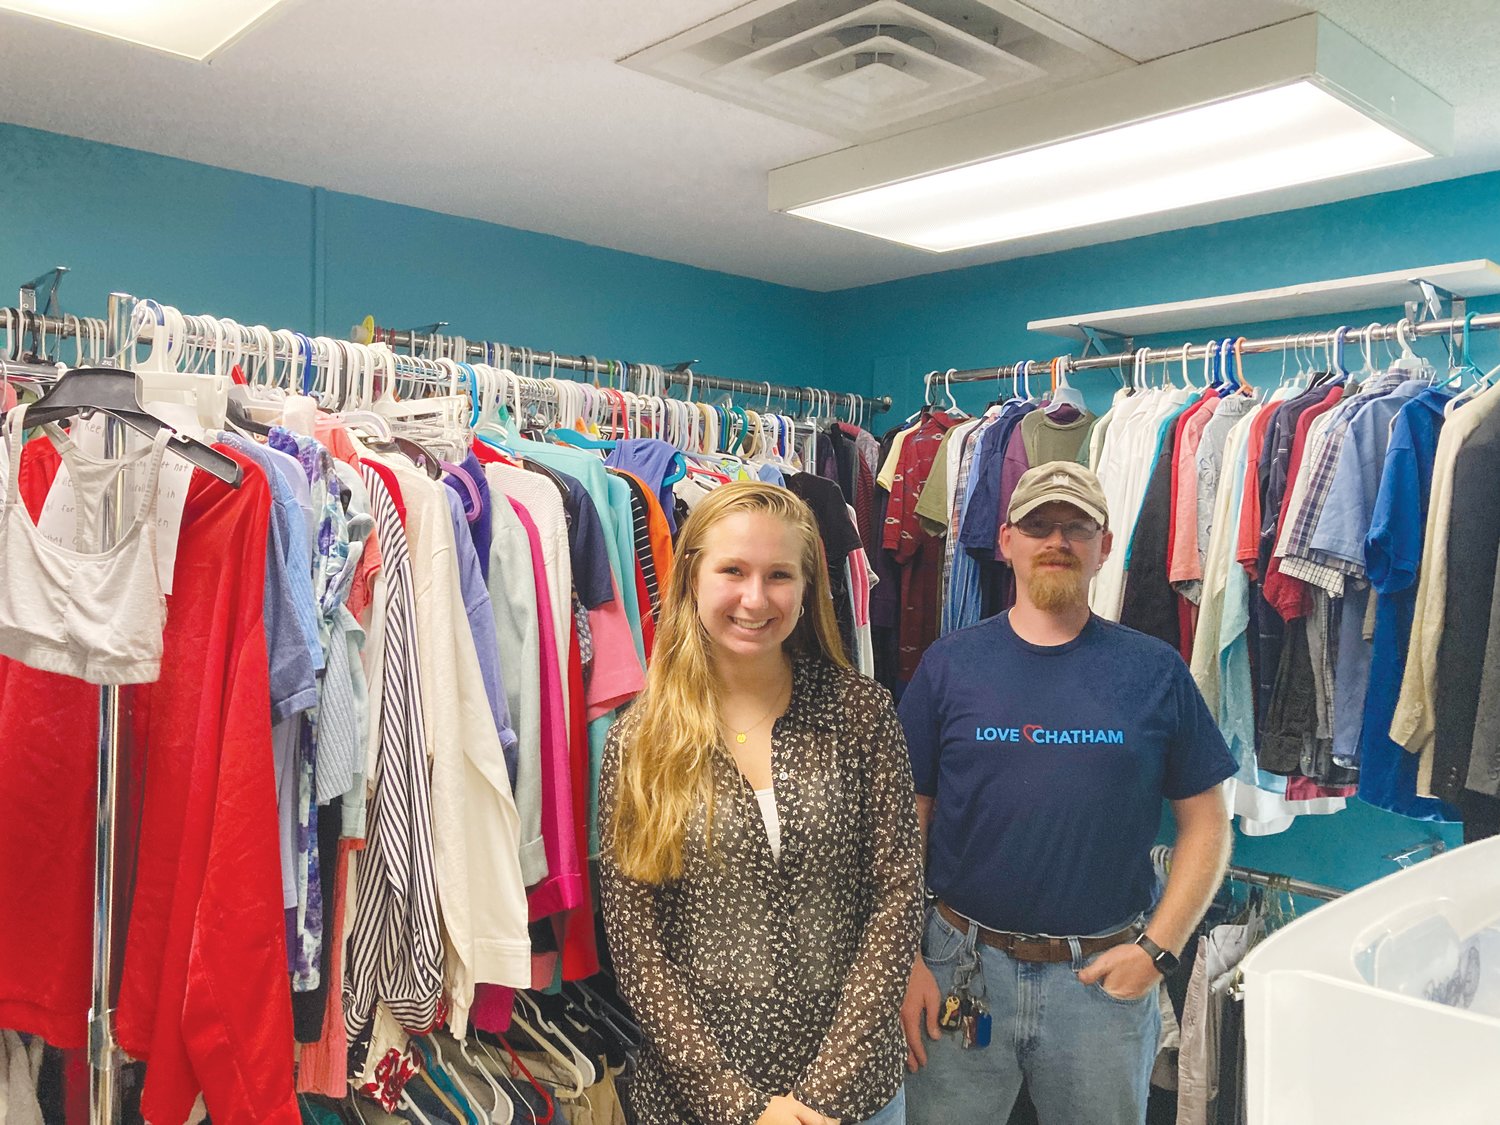 Love Chatham's clothing ministry allows for those in need to come and get clothing items they might lack. Pictured are Mary Lacey Eubanks, Love Chatham's summer intern, and Executive Director Dakota Philbrick.